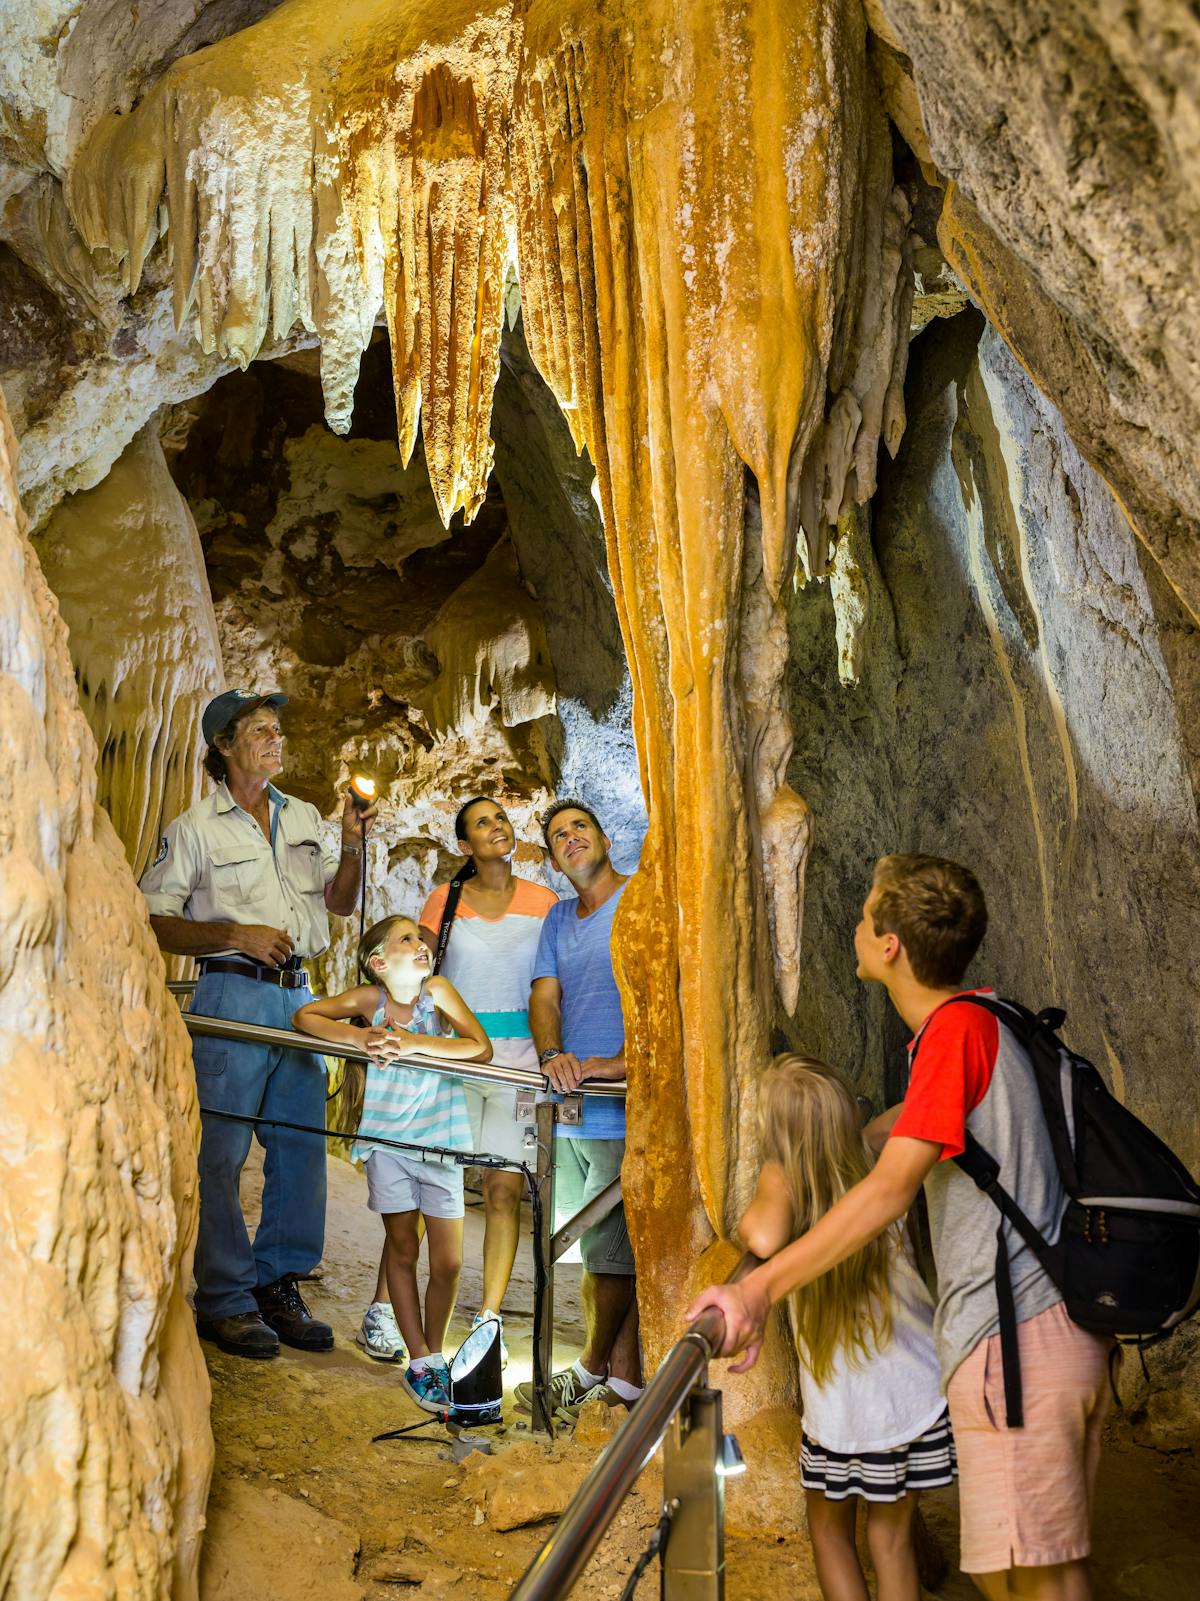 Exploring the Chillagoe caves